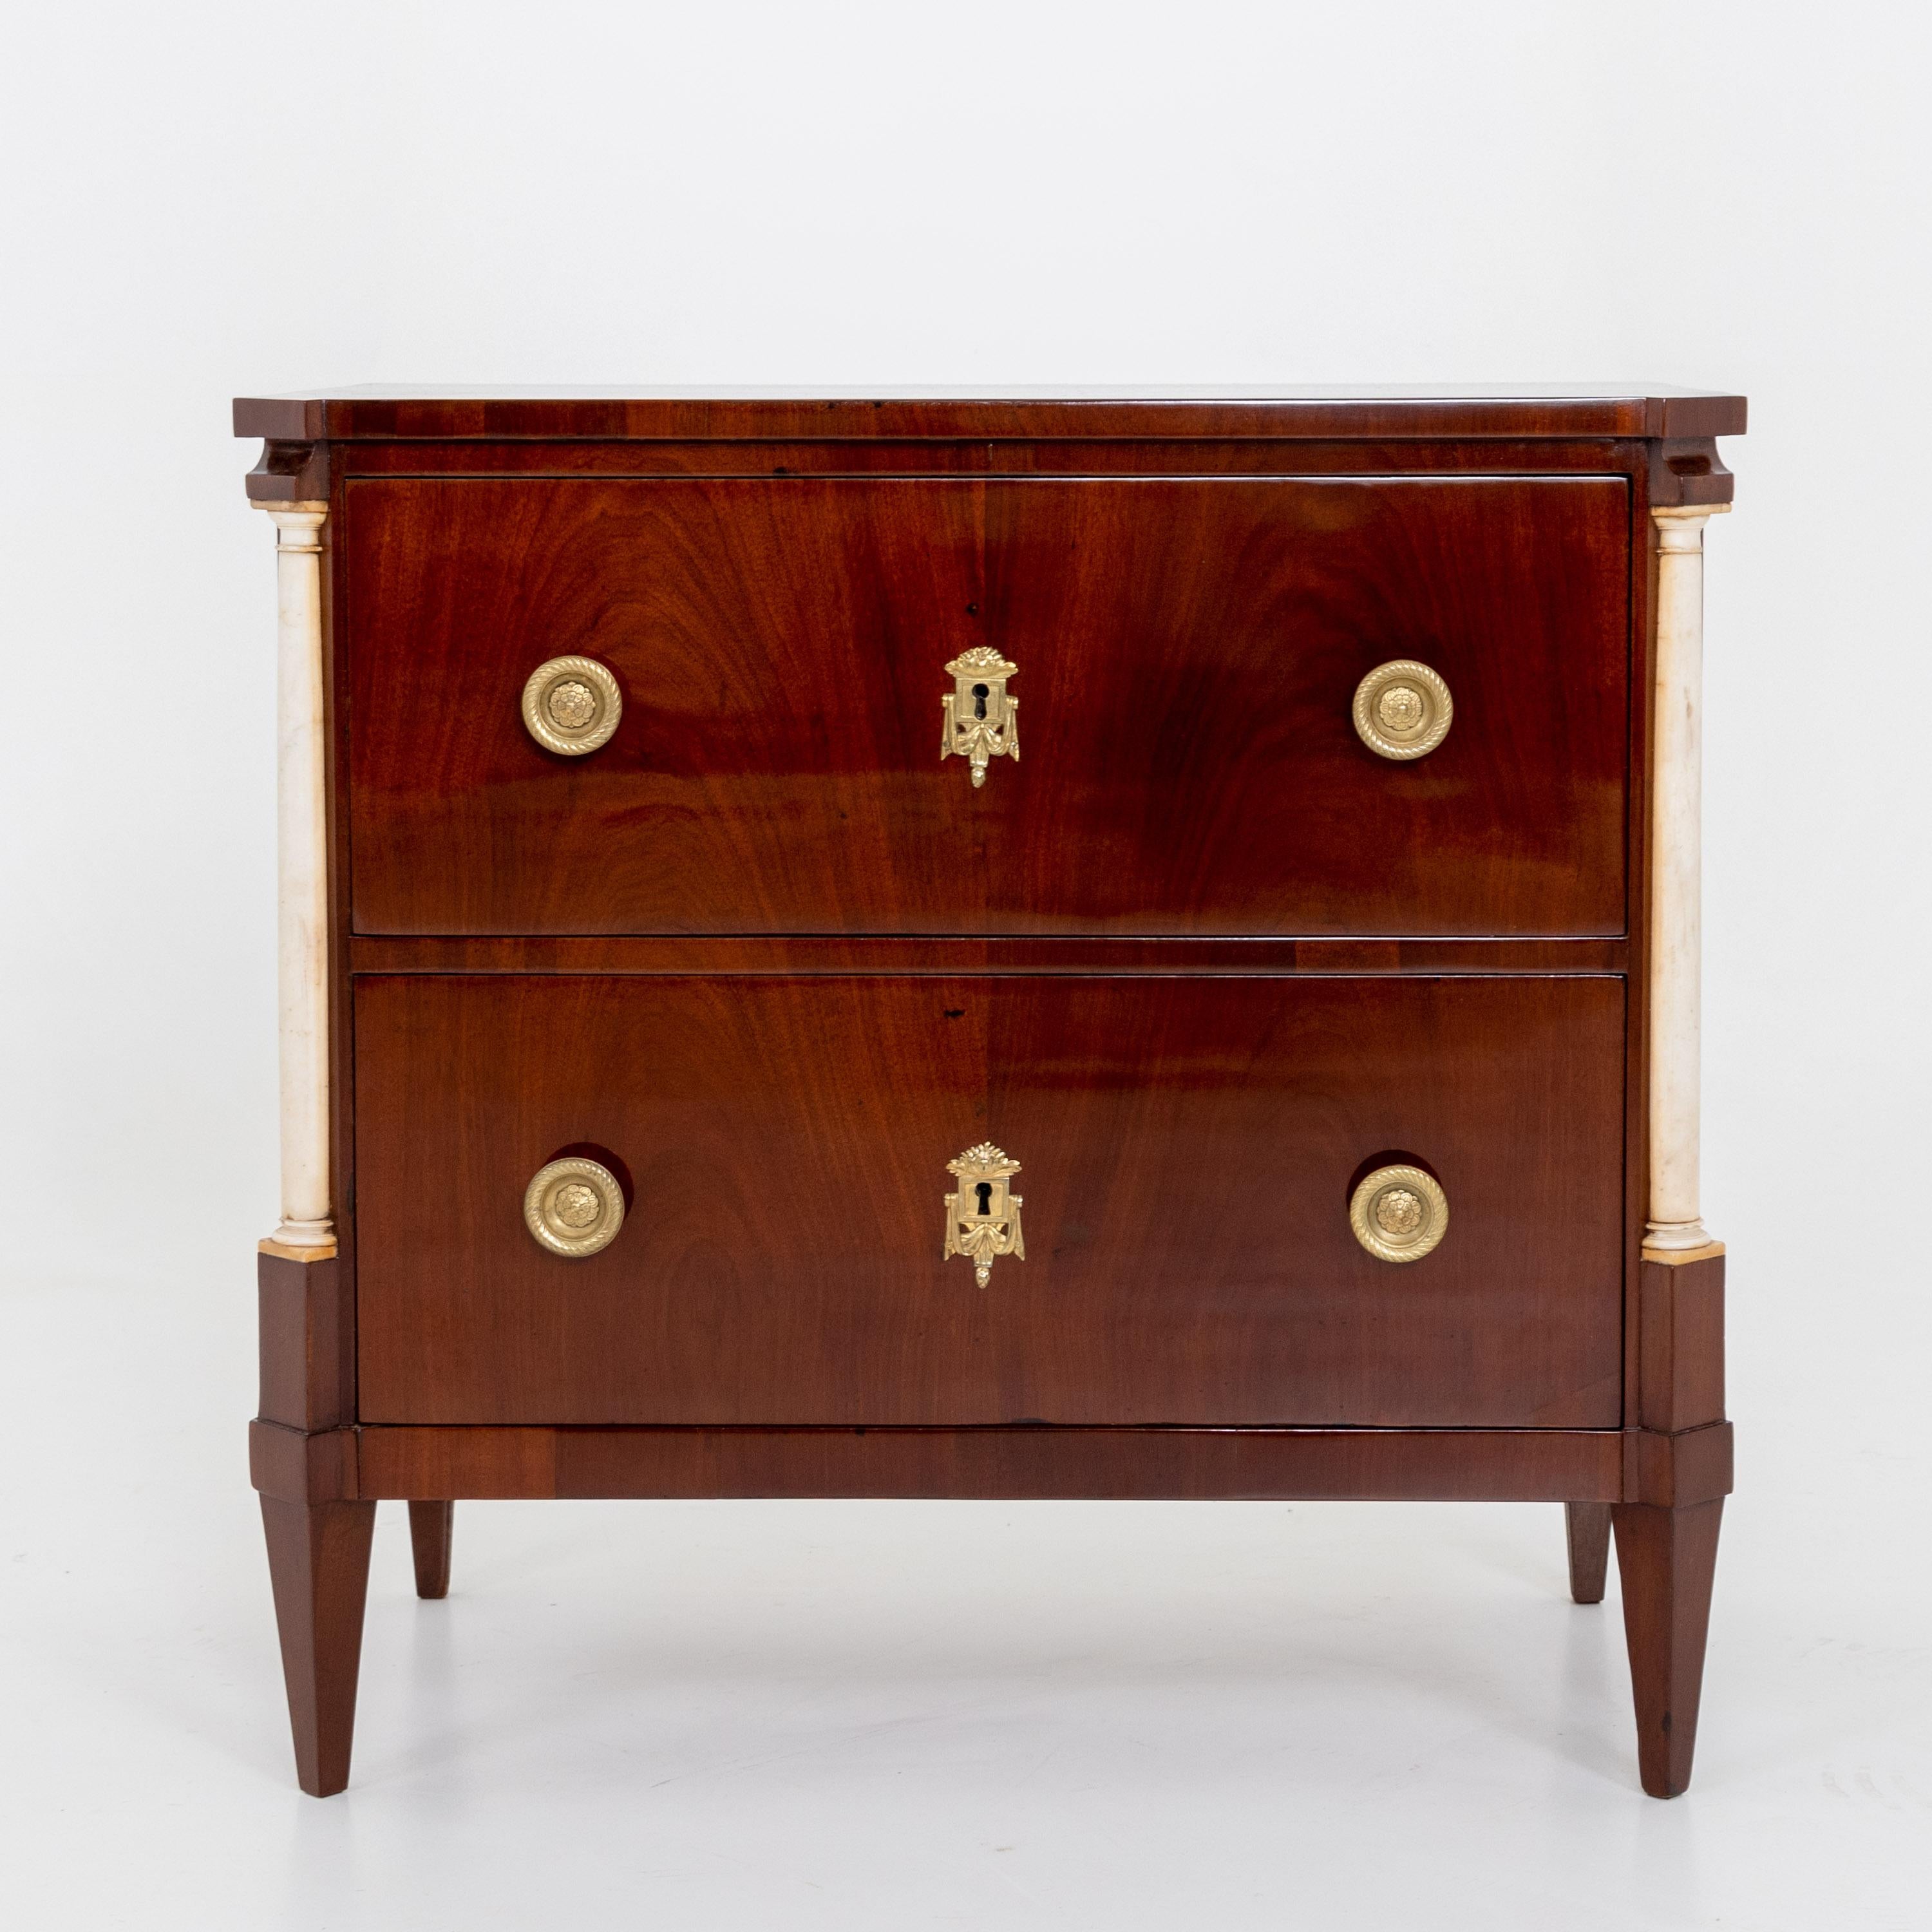 Empire chest of drawers with two drawers and quarter columns made of marble. The body is veneered in mahogany, the fittings are made of brass.